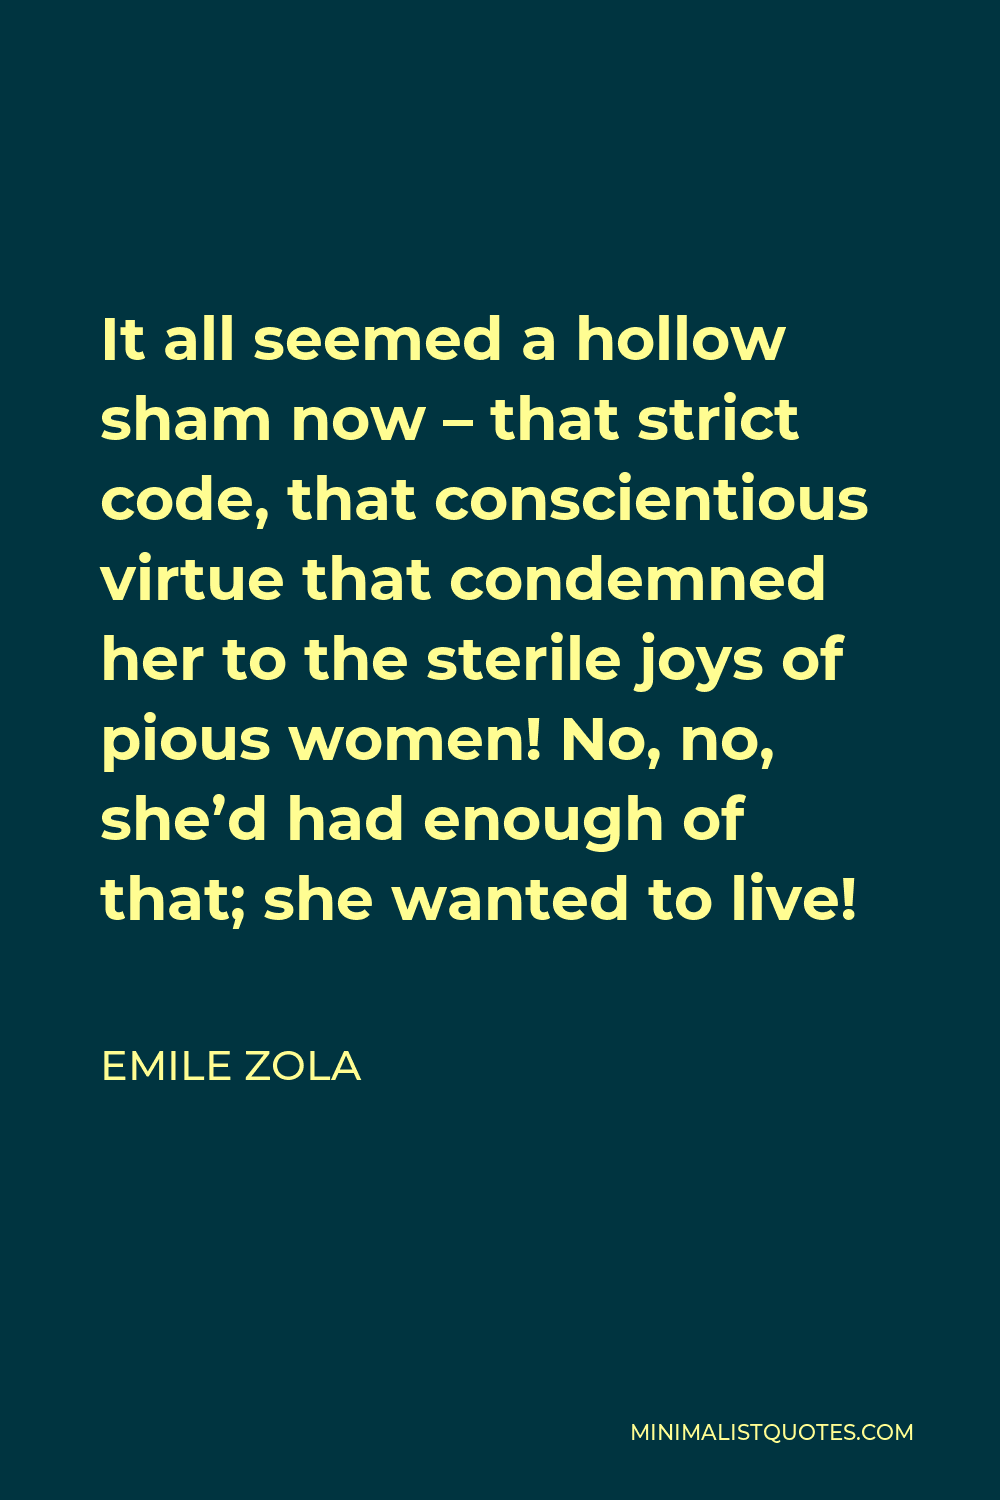 Emile Zola Quote - It all seemed a hollow sham now – that strict code, that conscientious virtue that condemned her to the sterile joys of pious women! No, no, she’d had enough of that; she wanted to live!